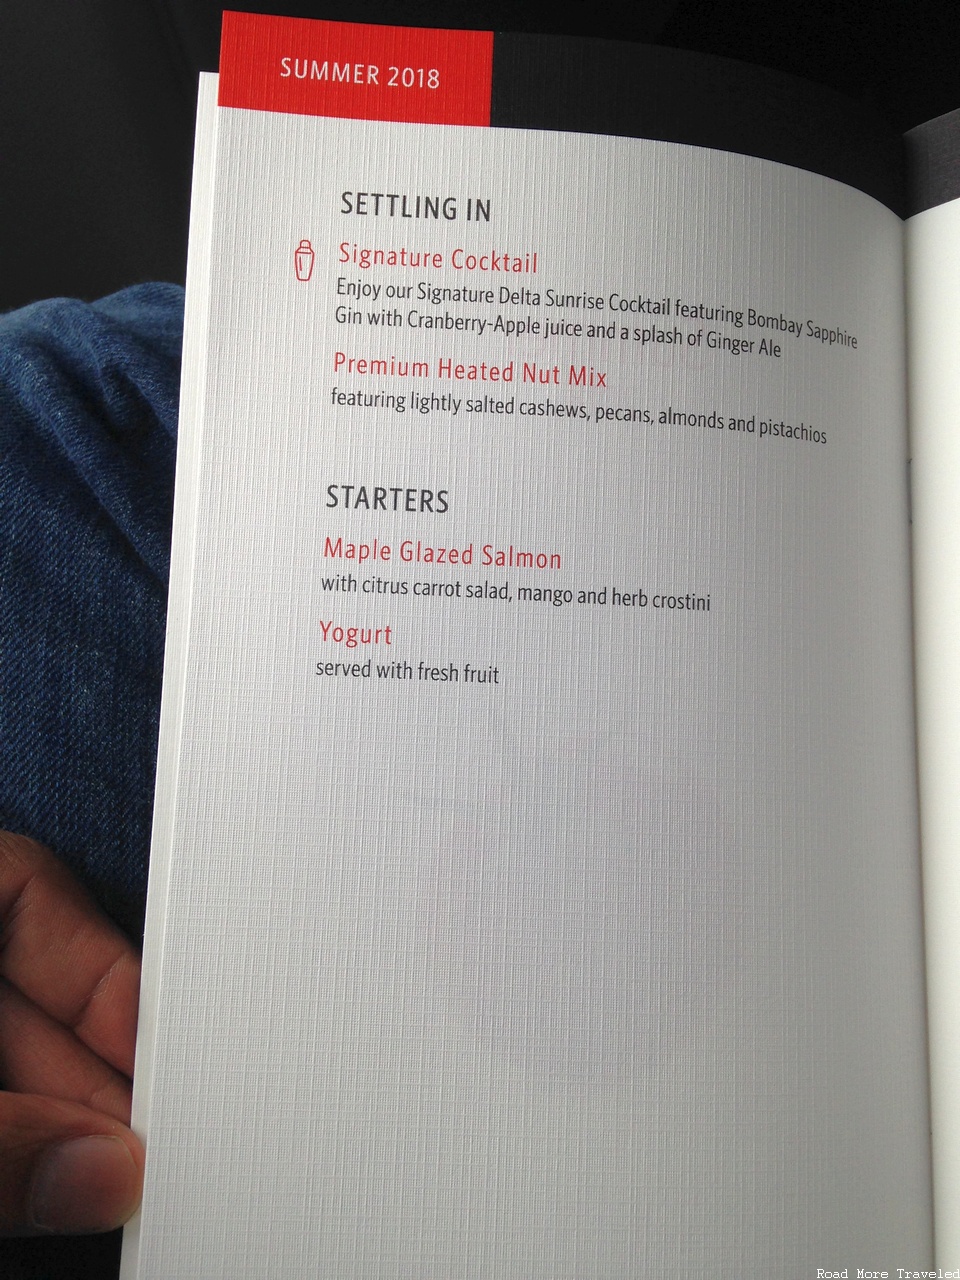 Delta One A350 menu - cocktails and starters